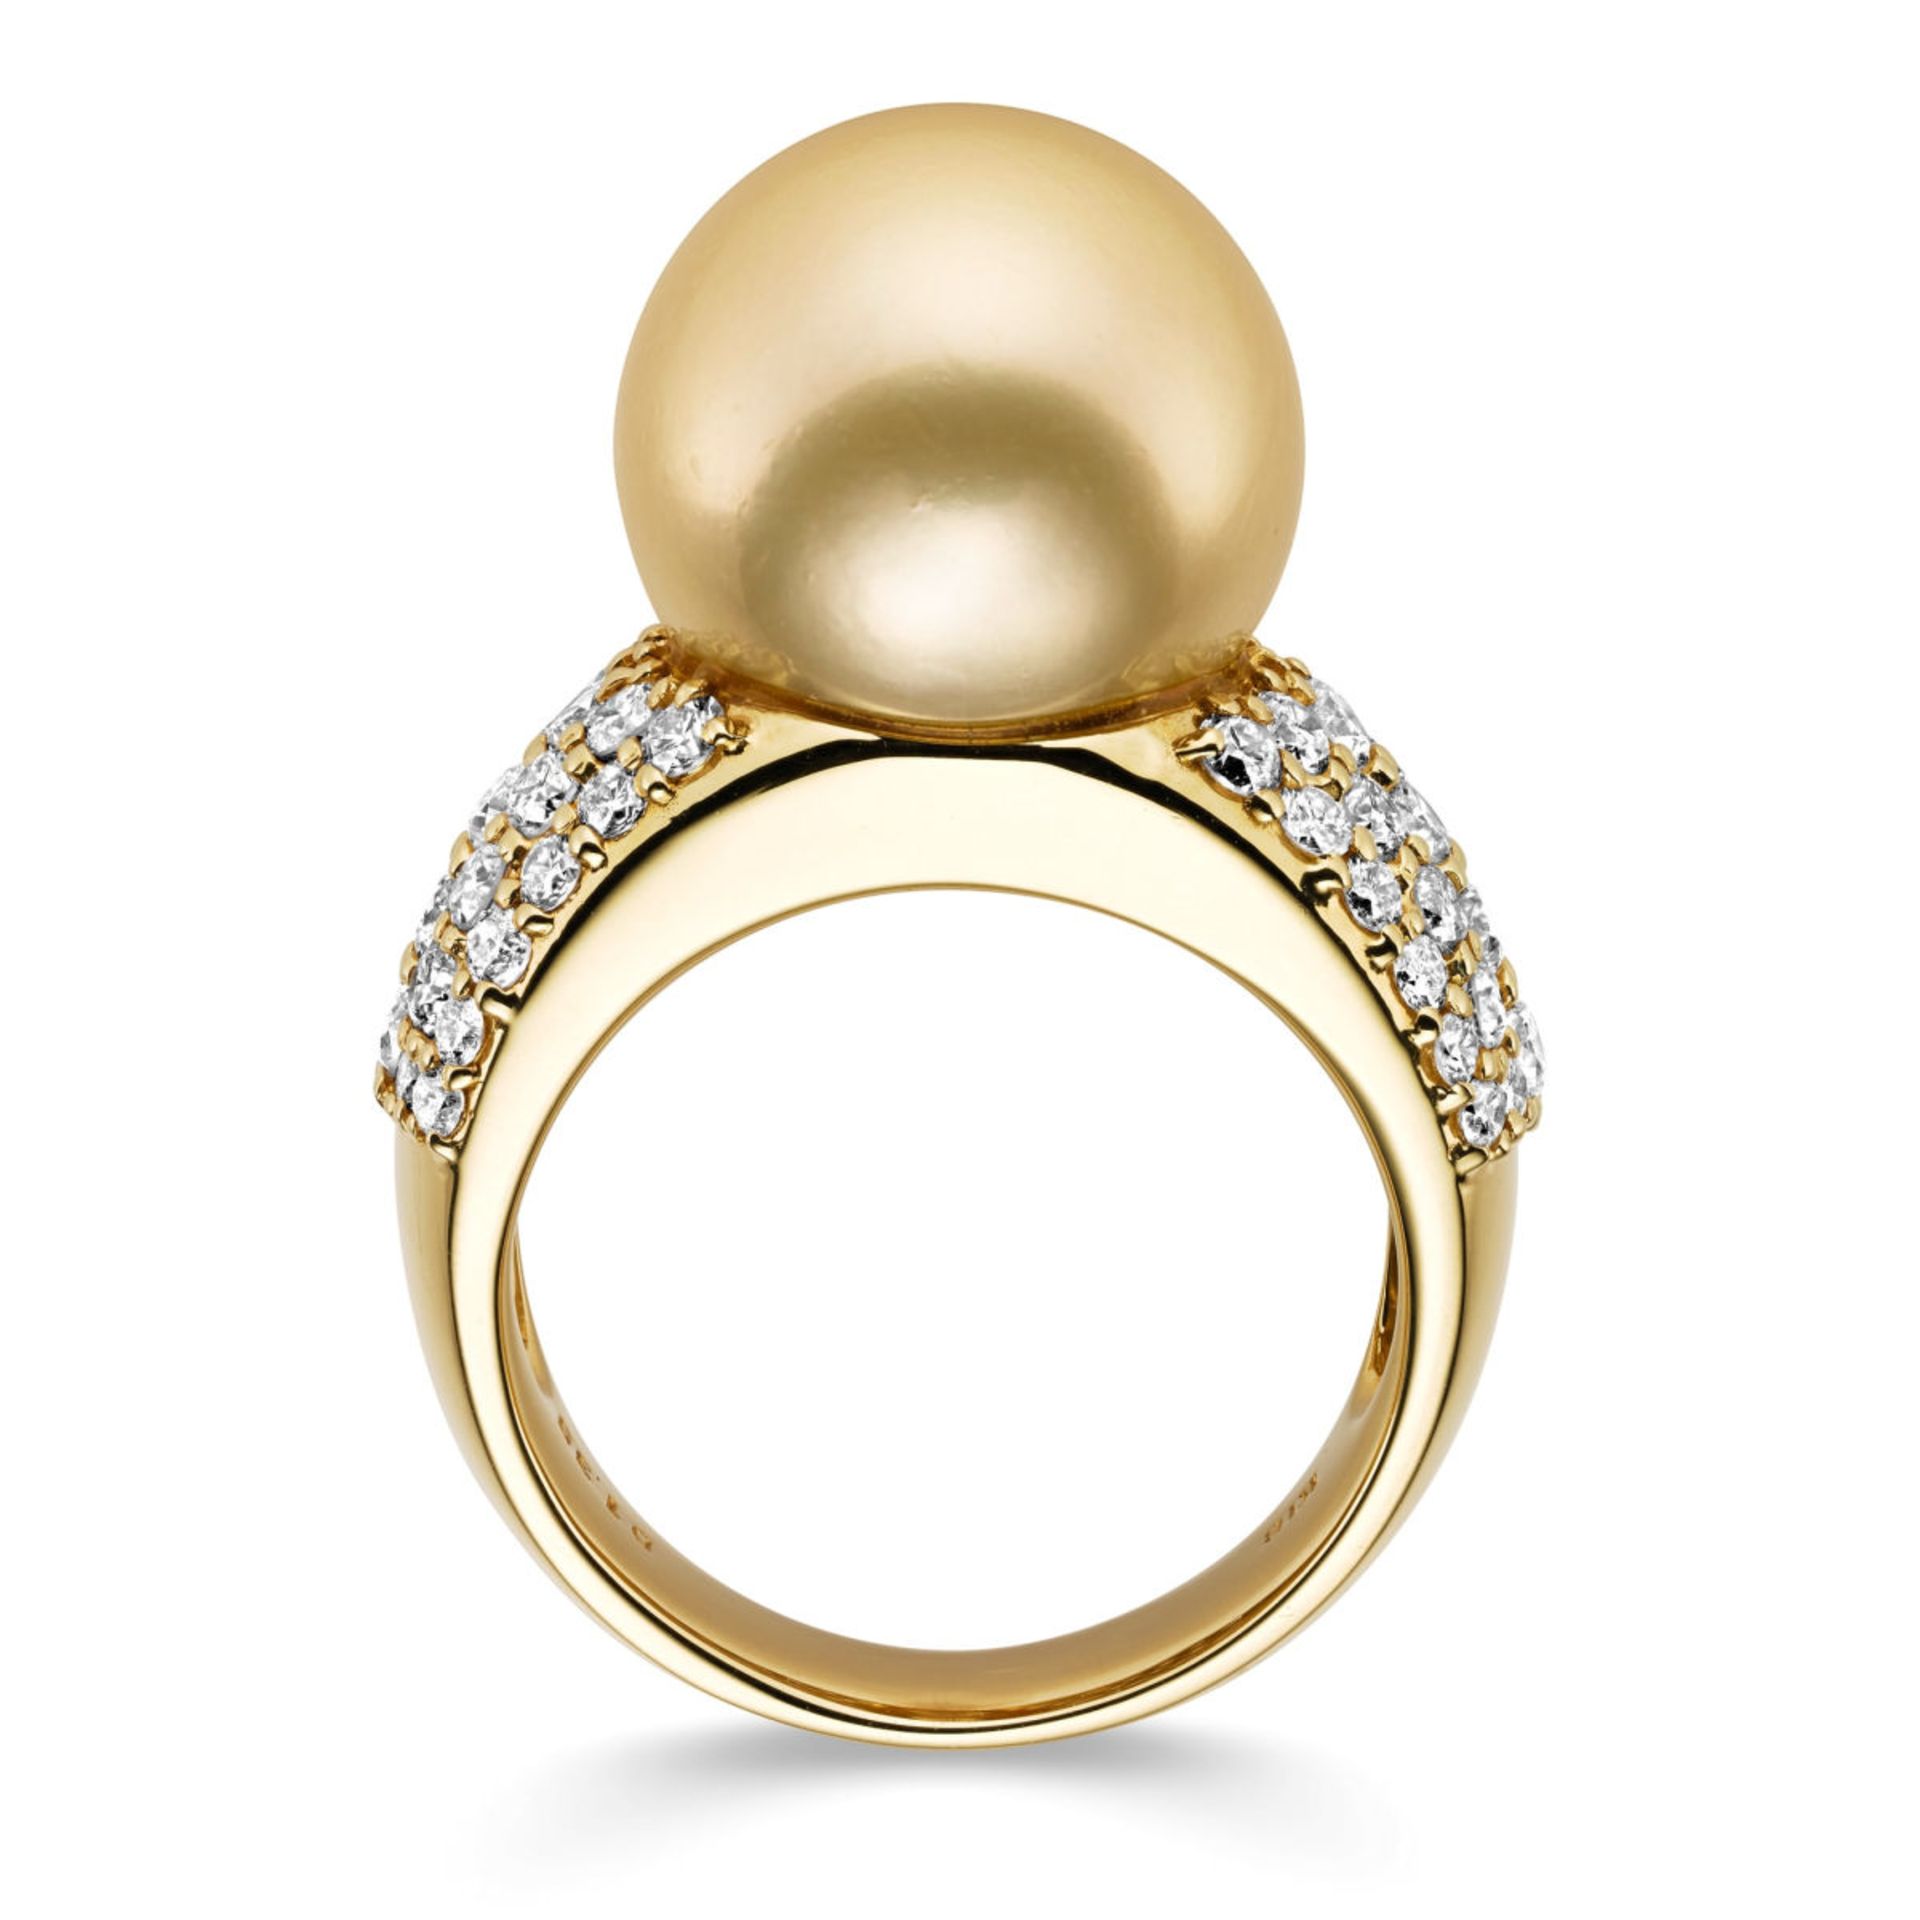 South Sea pearl ring with diamonds